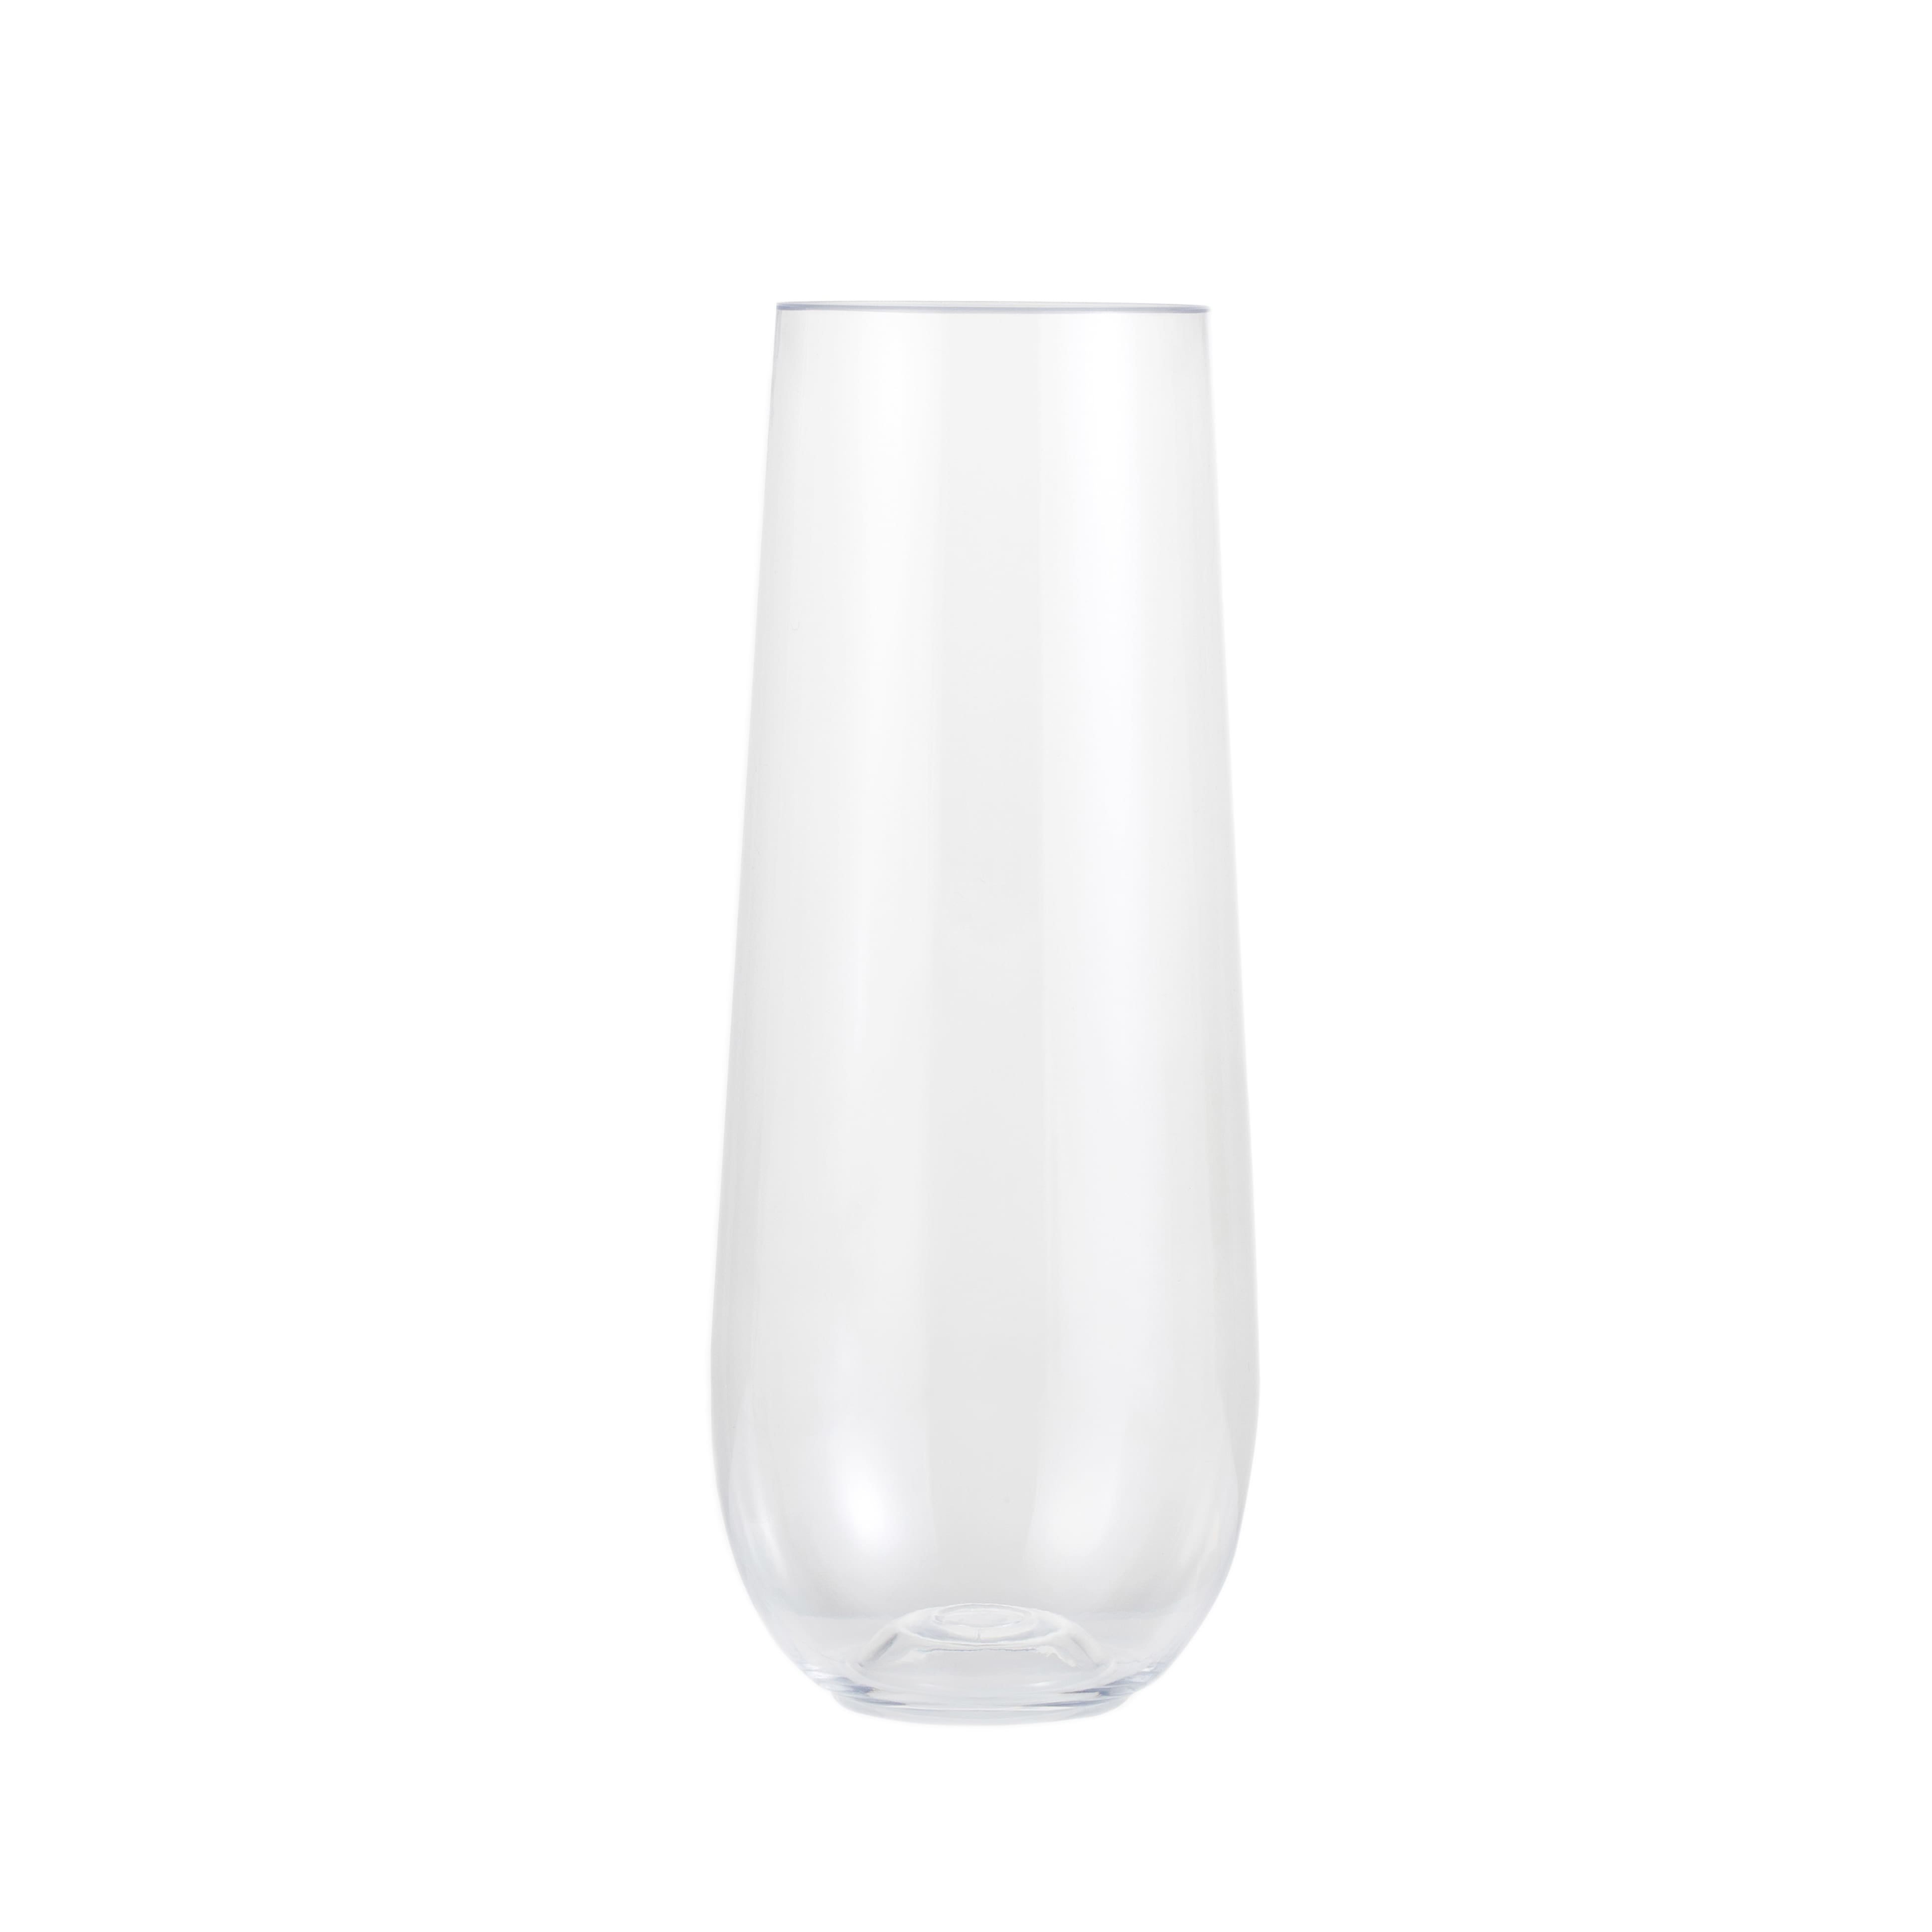 8oz. Stemless Champagne Flute by Celebrate It™